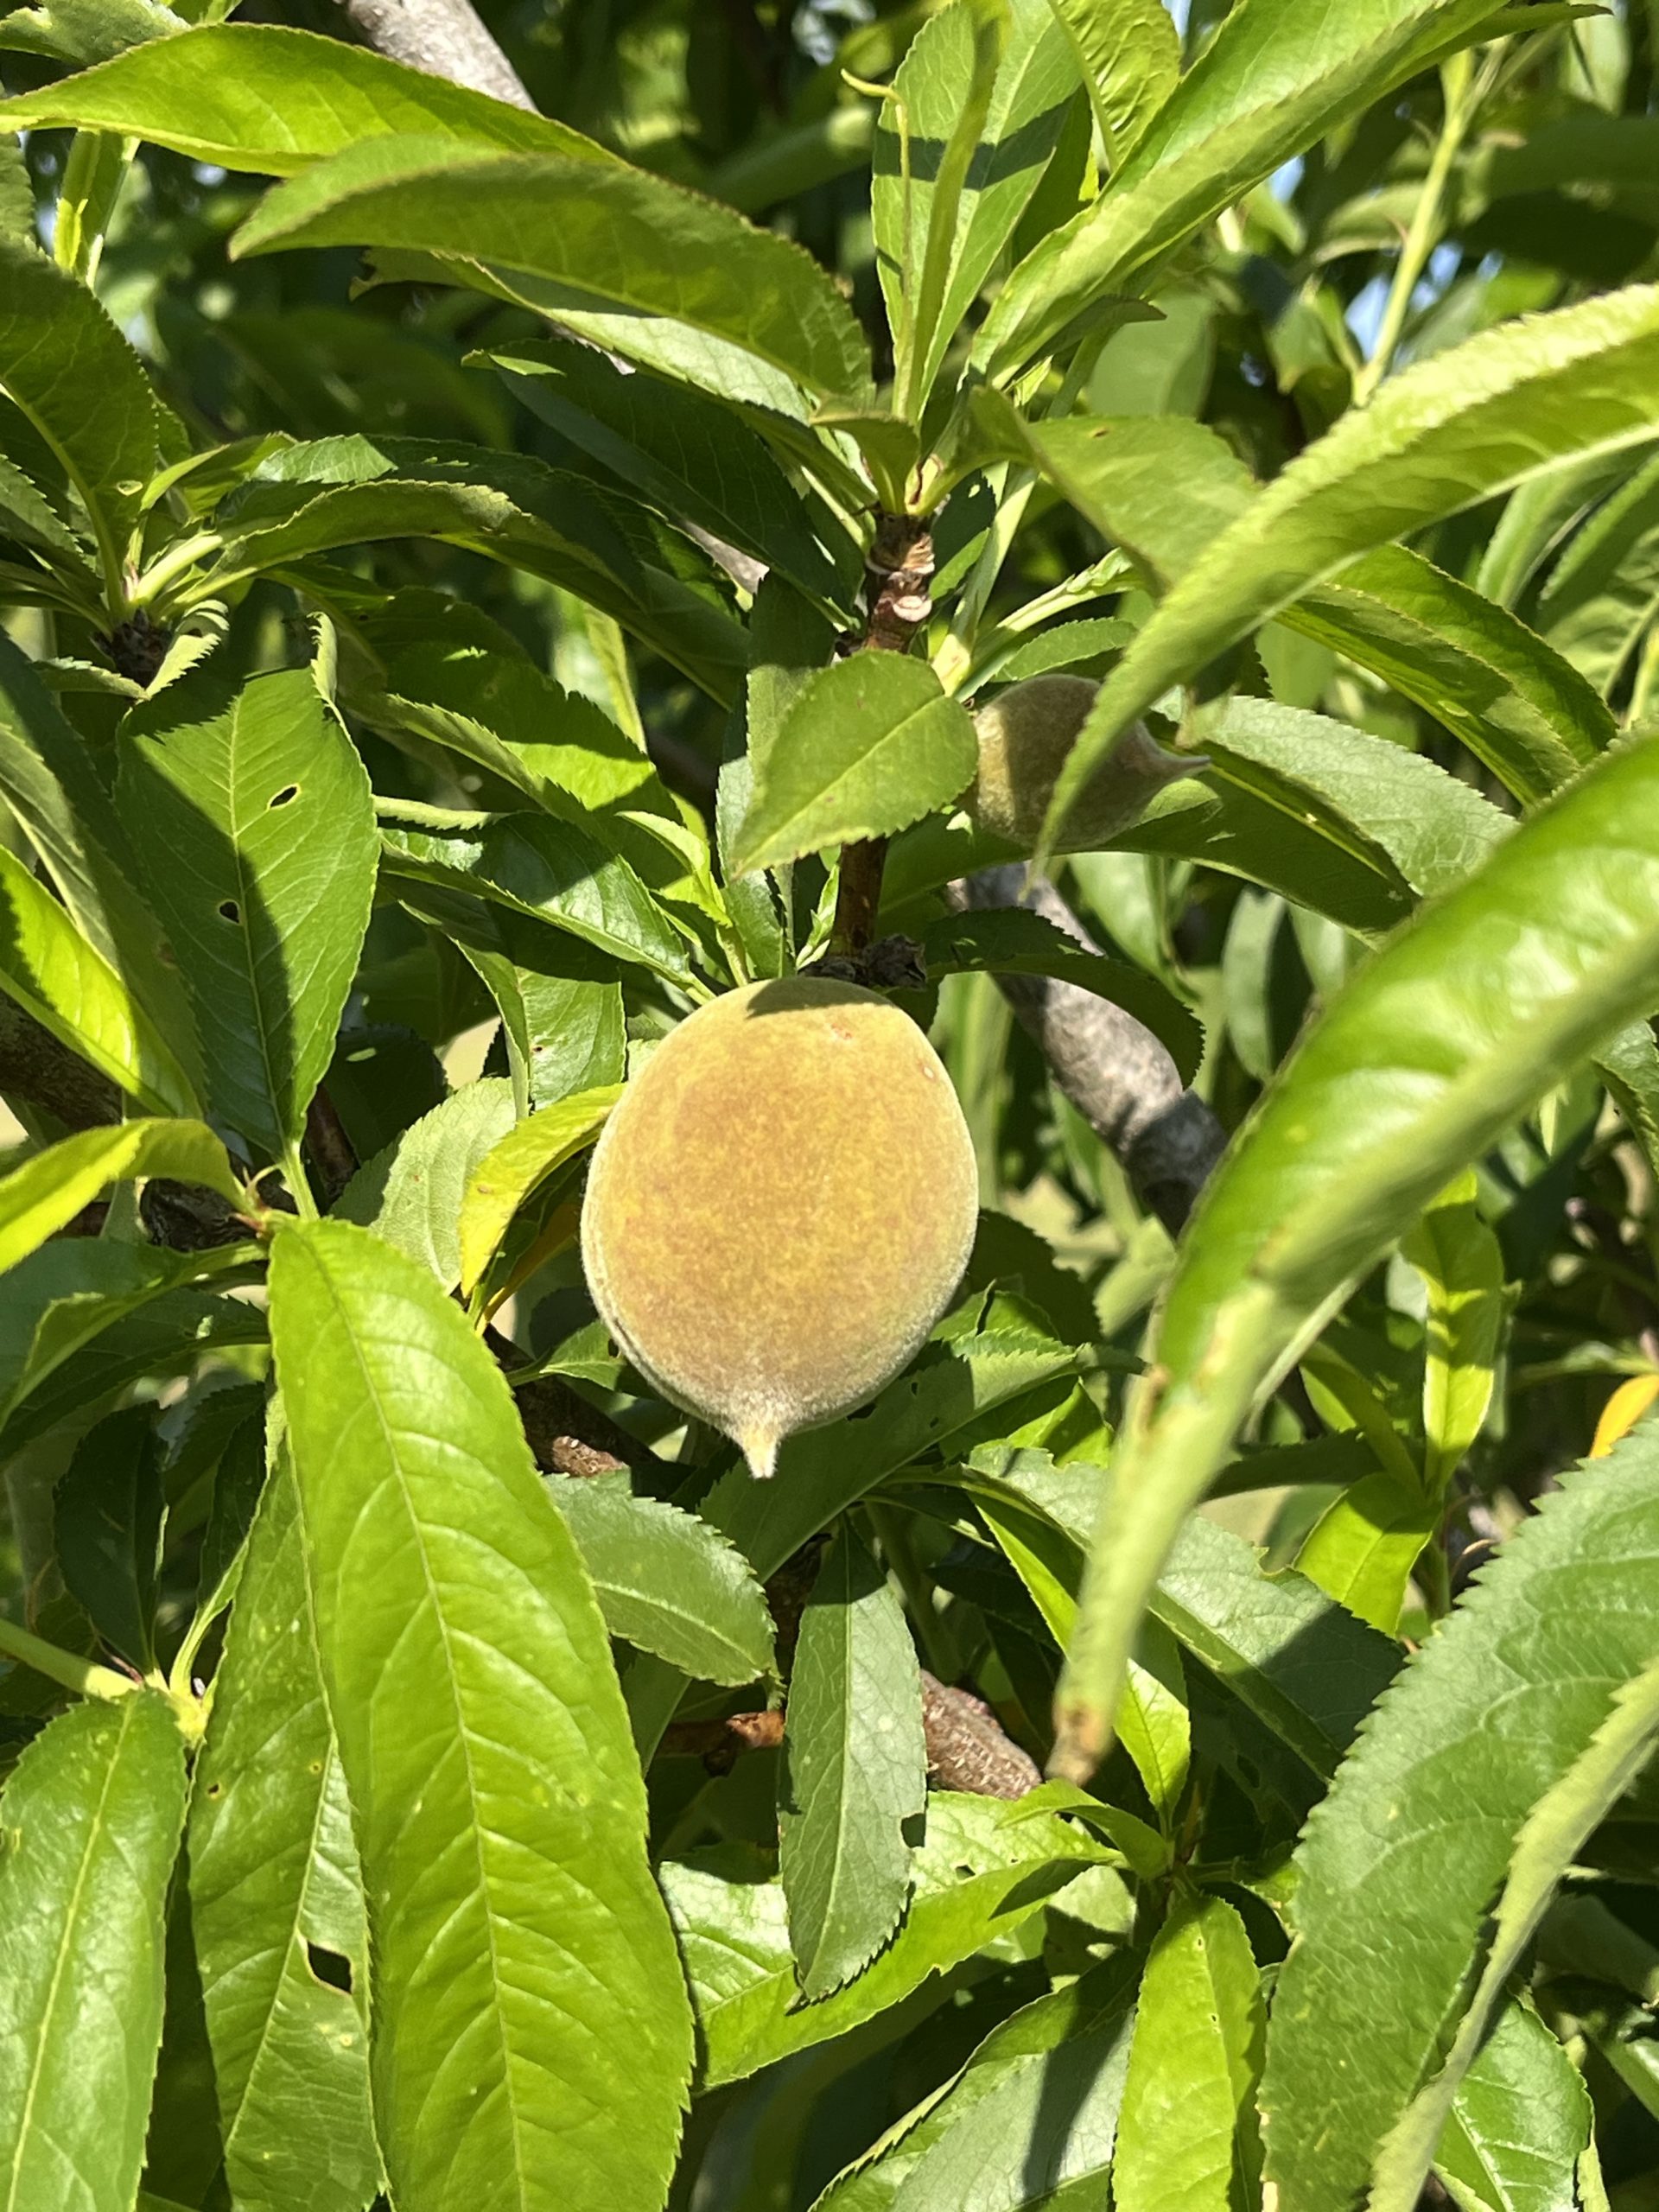 Featured image for “Sweet Turnaround: Bountiful Peach Crop for Georgia Producers”